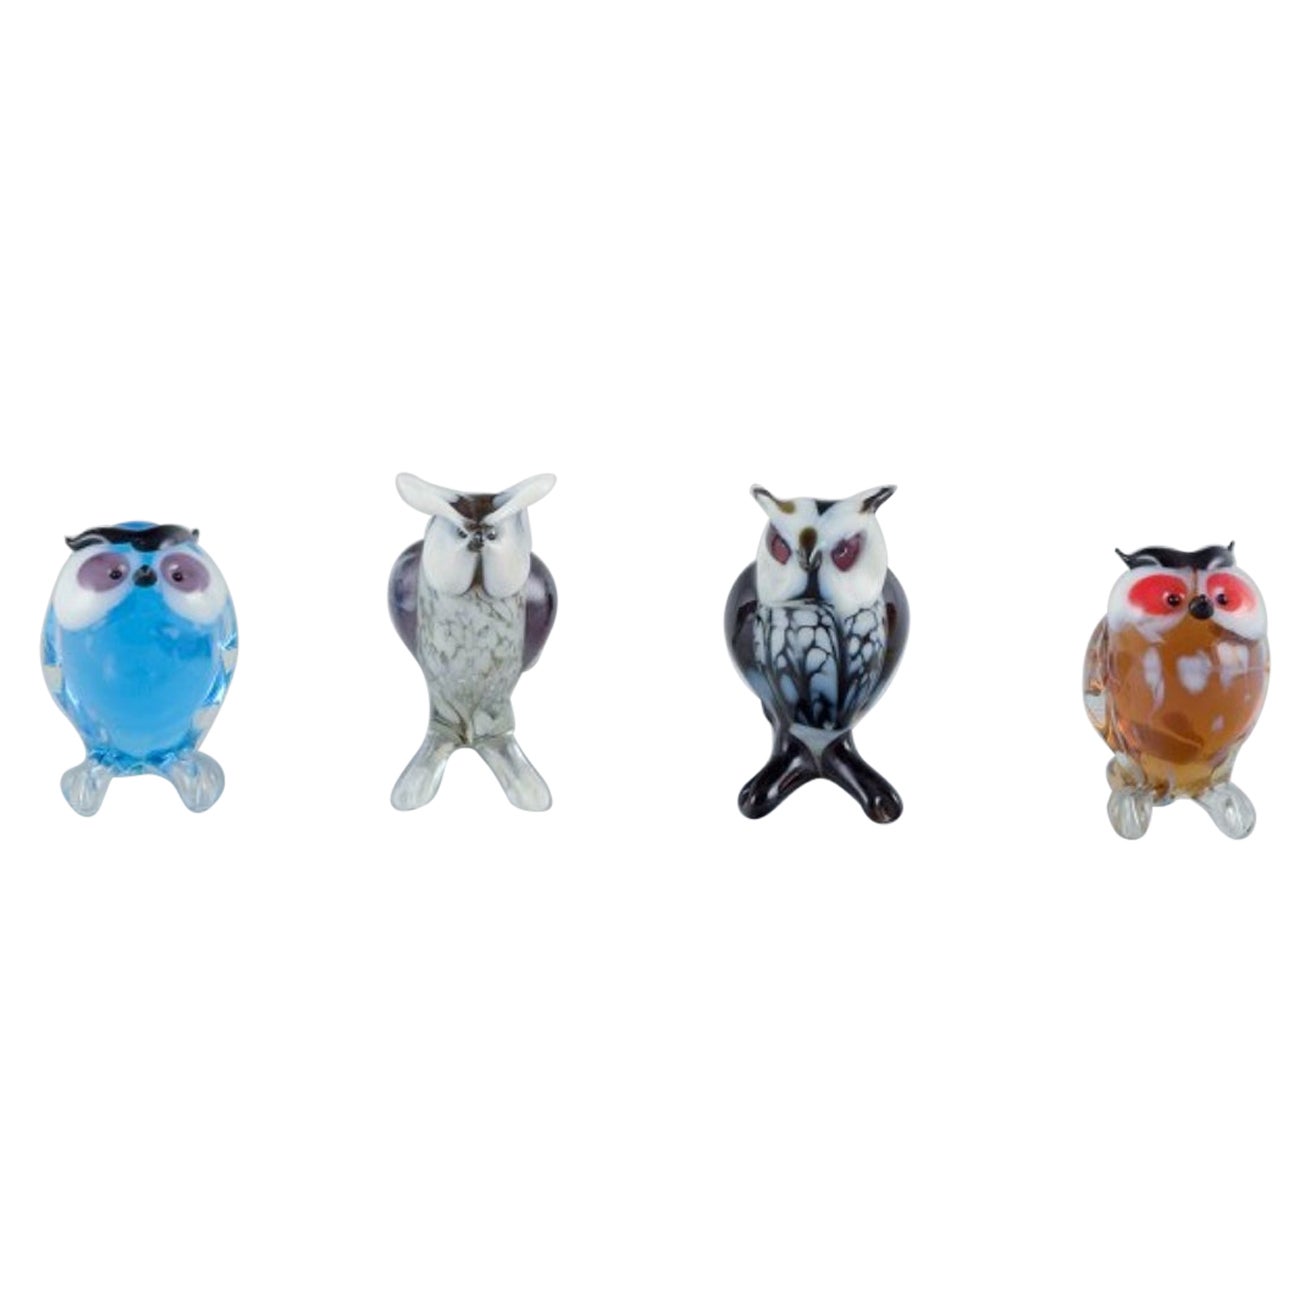 Murano, Italy. Collection of four miniature glass figurines of owls. For Sale